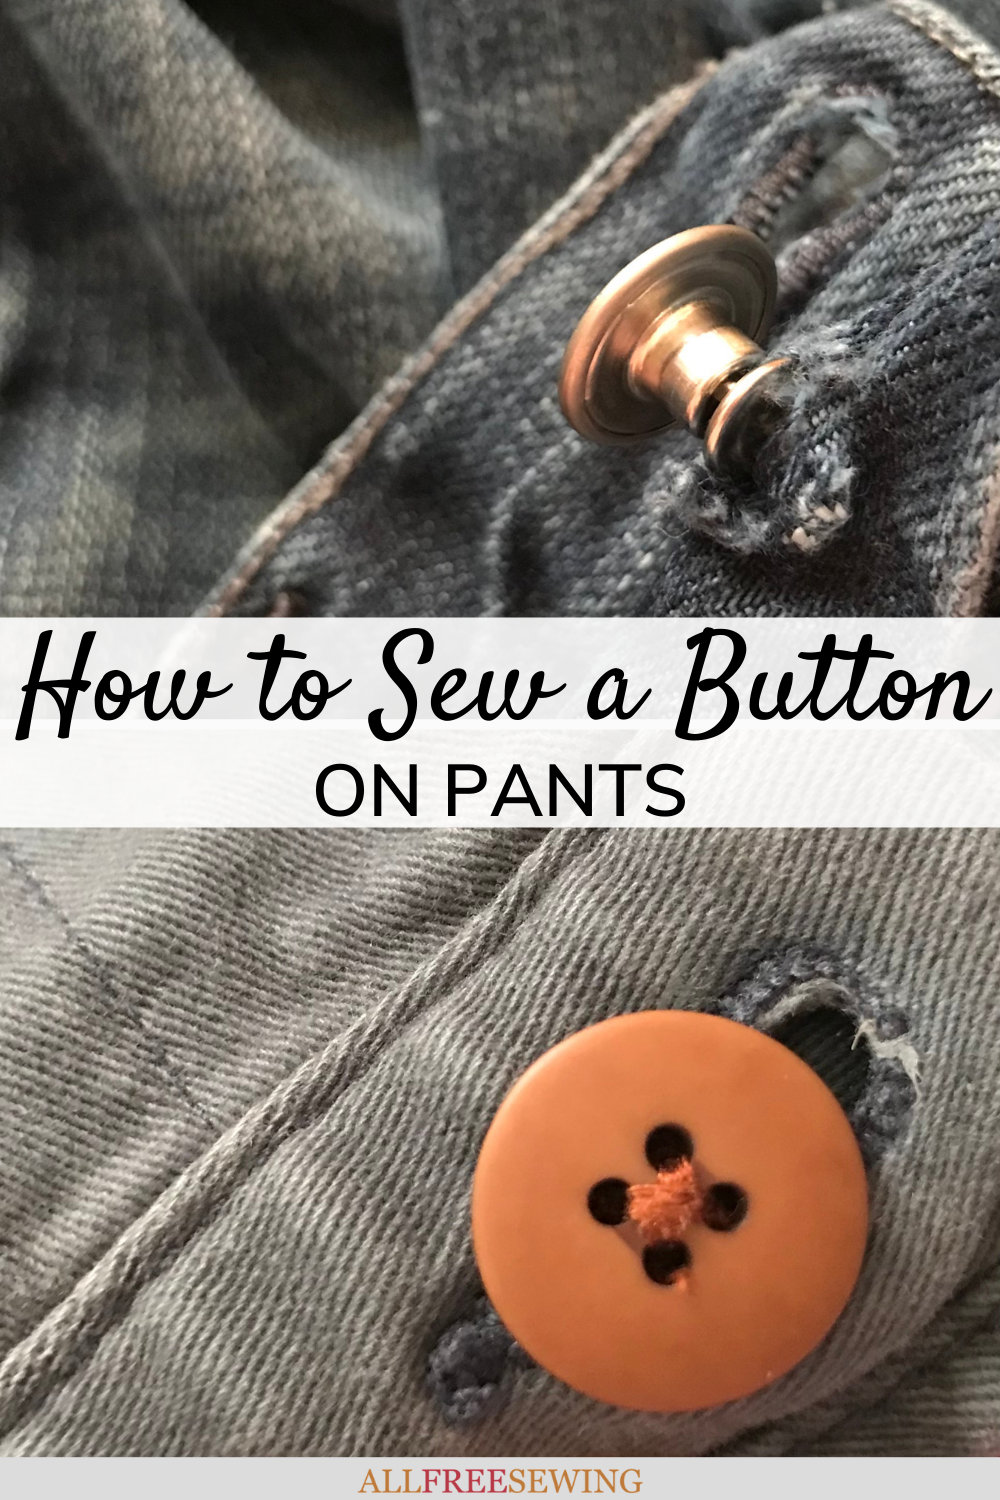 How to Sew a Button on Pants | AllFreeSewing.com